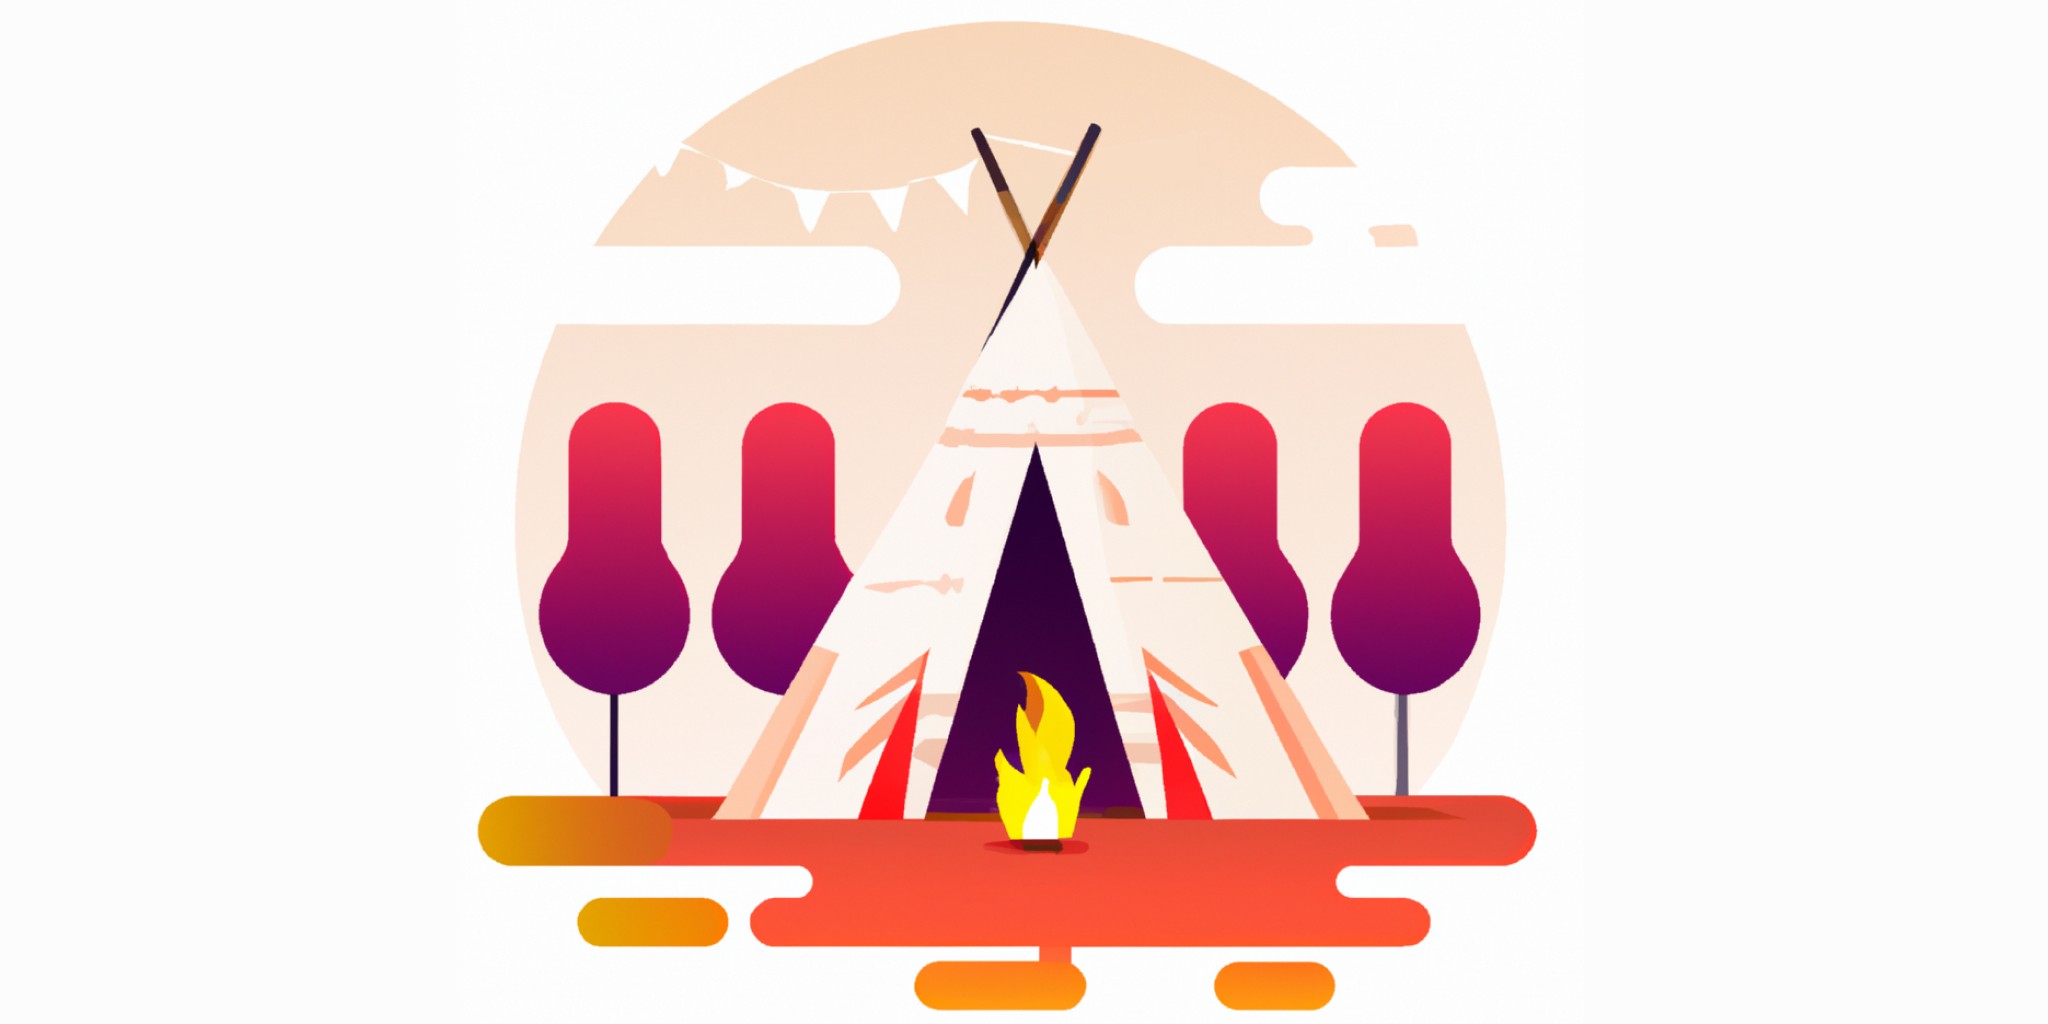 teepee village with a bonfire in the middle in flat illustration style with gradients and white background